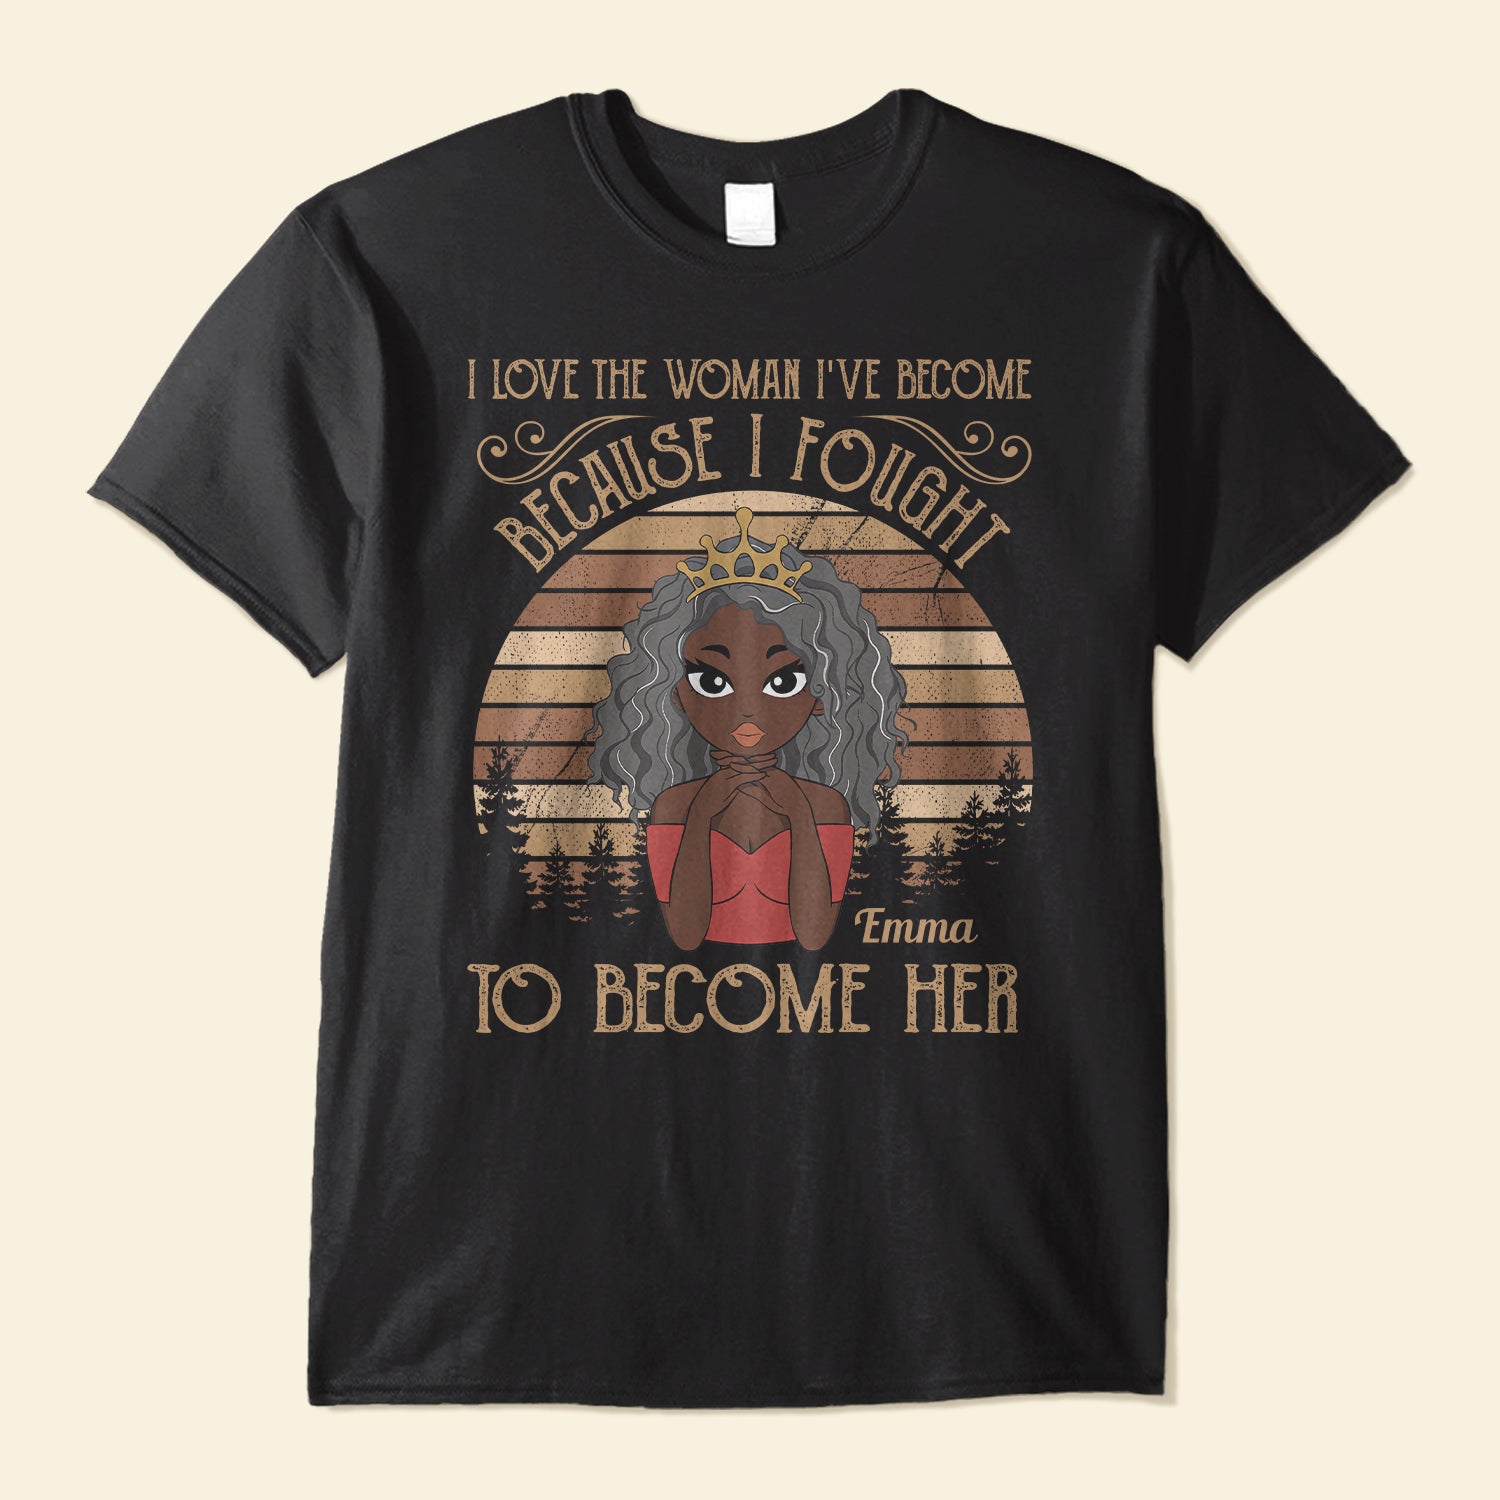 I Fought To Become Her - Personalized Shirt - Birthday Gift For Black Woman, Black Girl